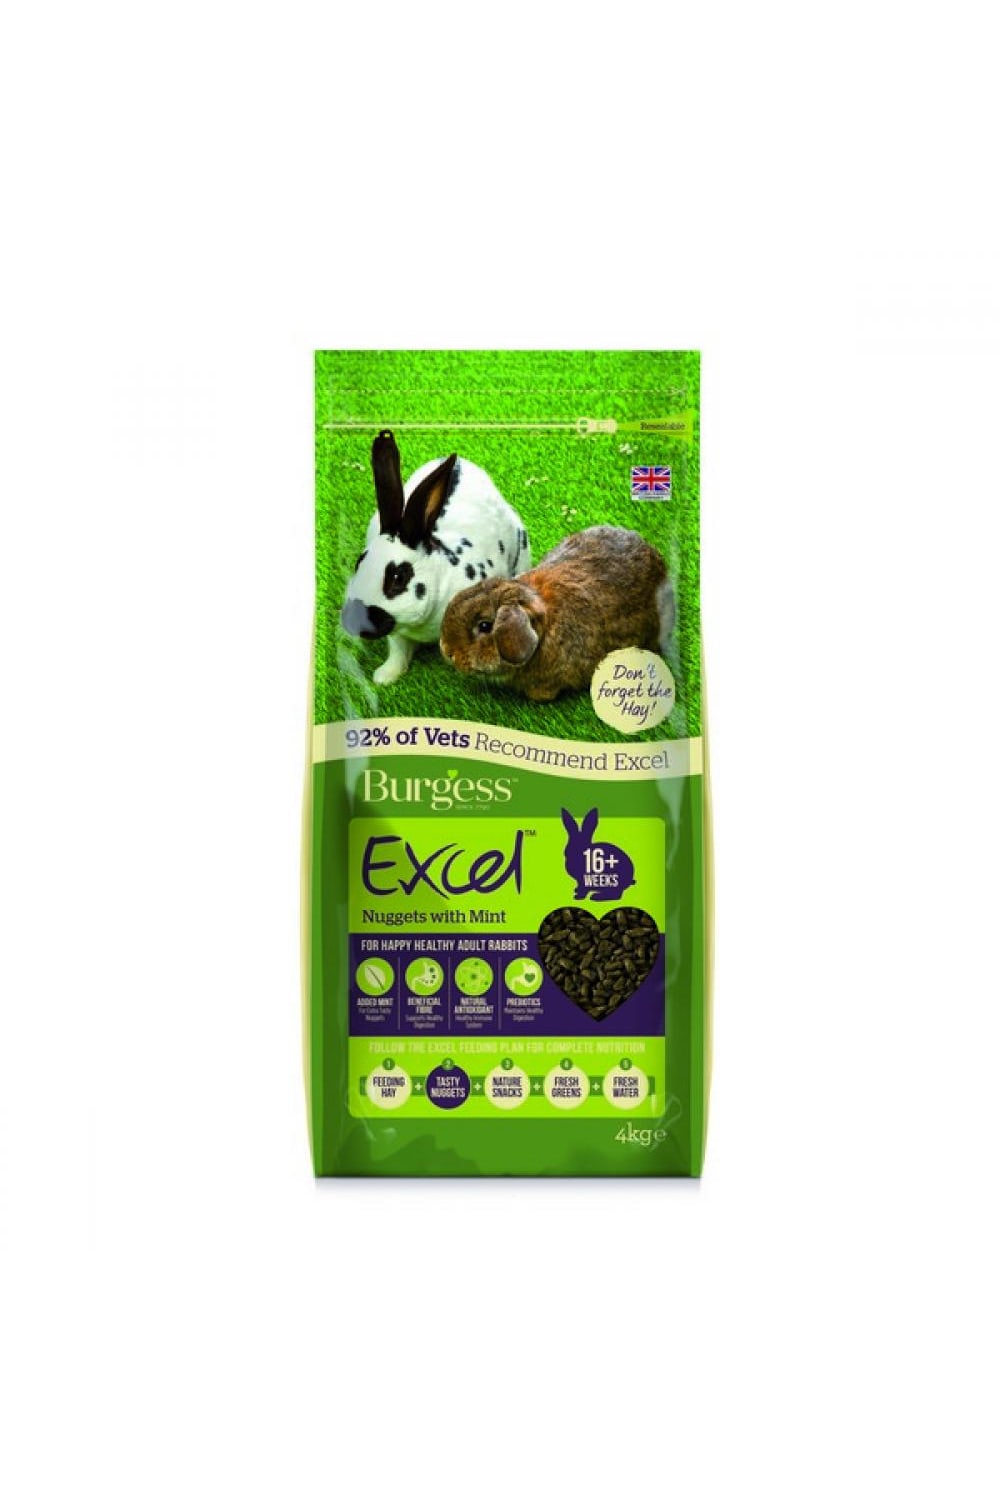 Burgess Excel Adult Rabbit Food Nuggets With Mint (May Vary) (8.8lb)